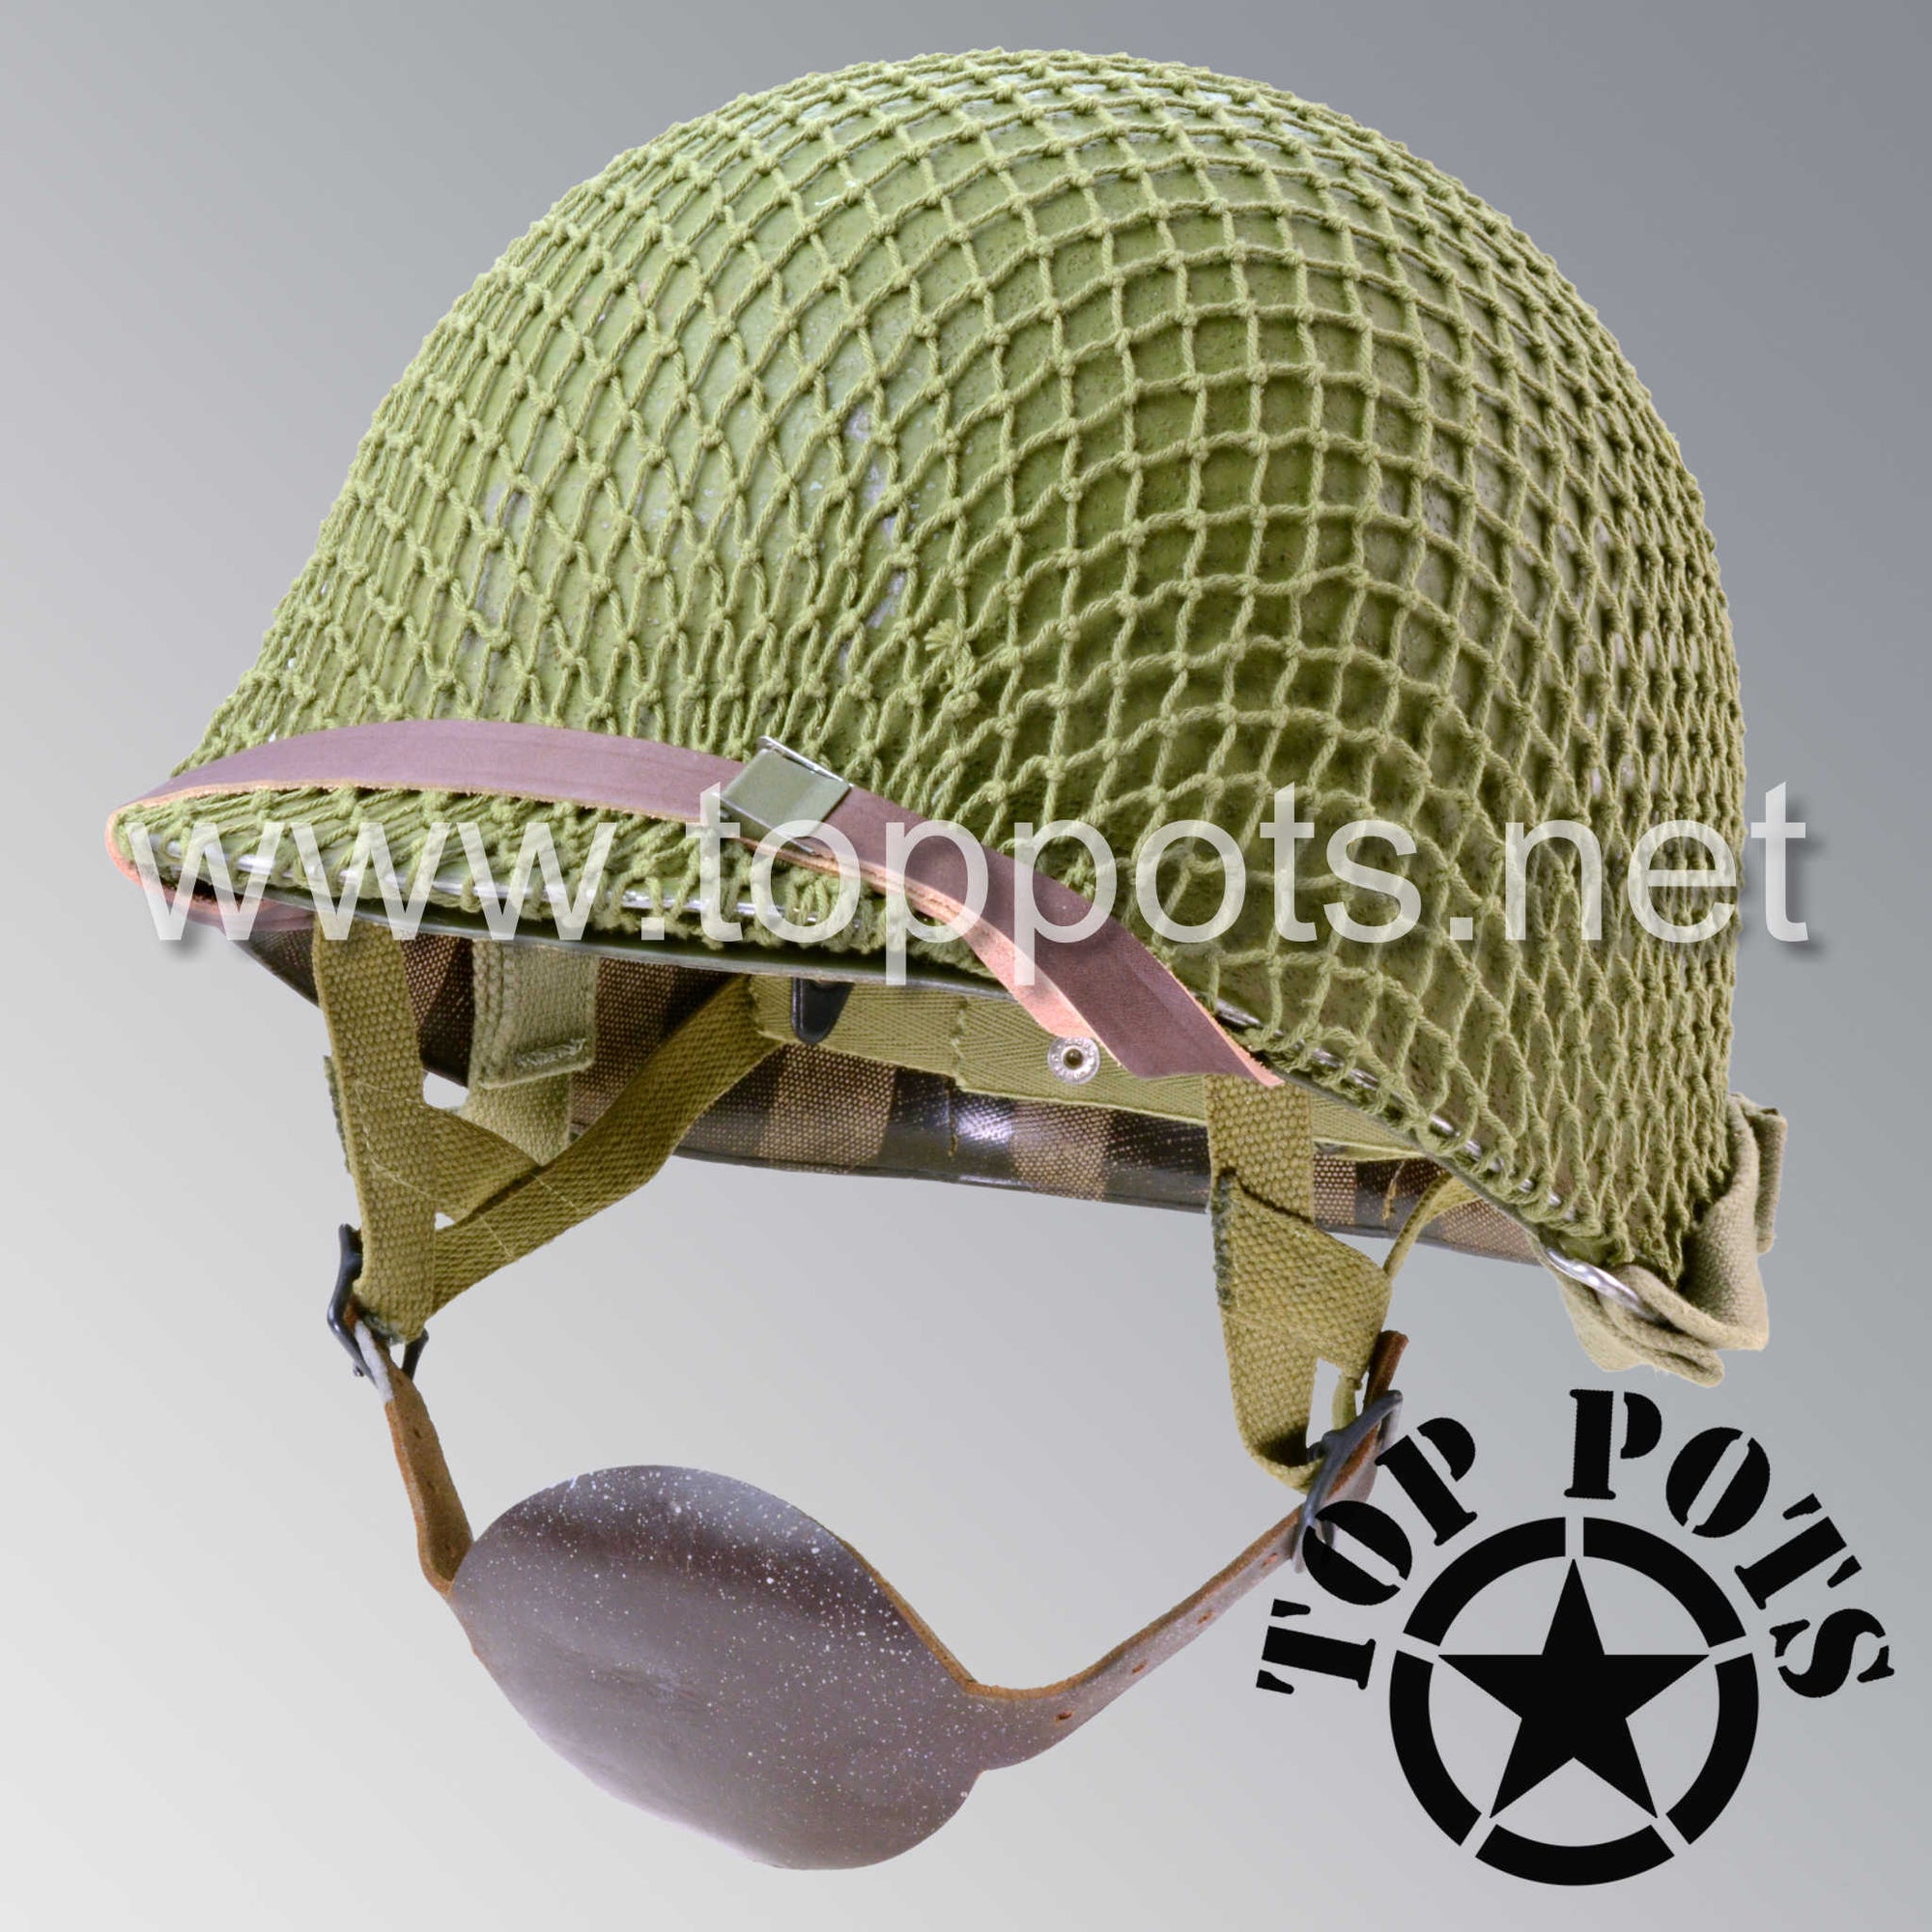 WWII US Army Aged Original M1C Paratrooper Airborne Helmet Swivel Bale Shell and Liner with Late War Finish and Net